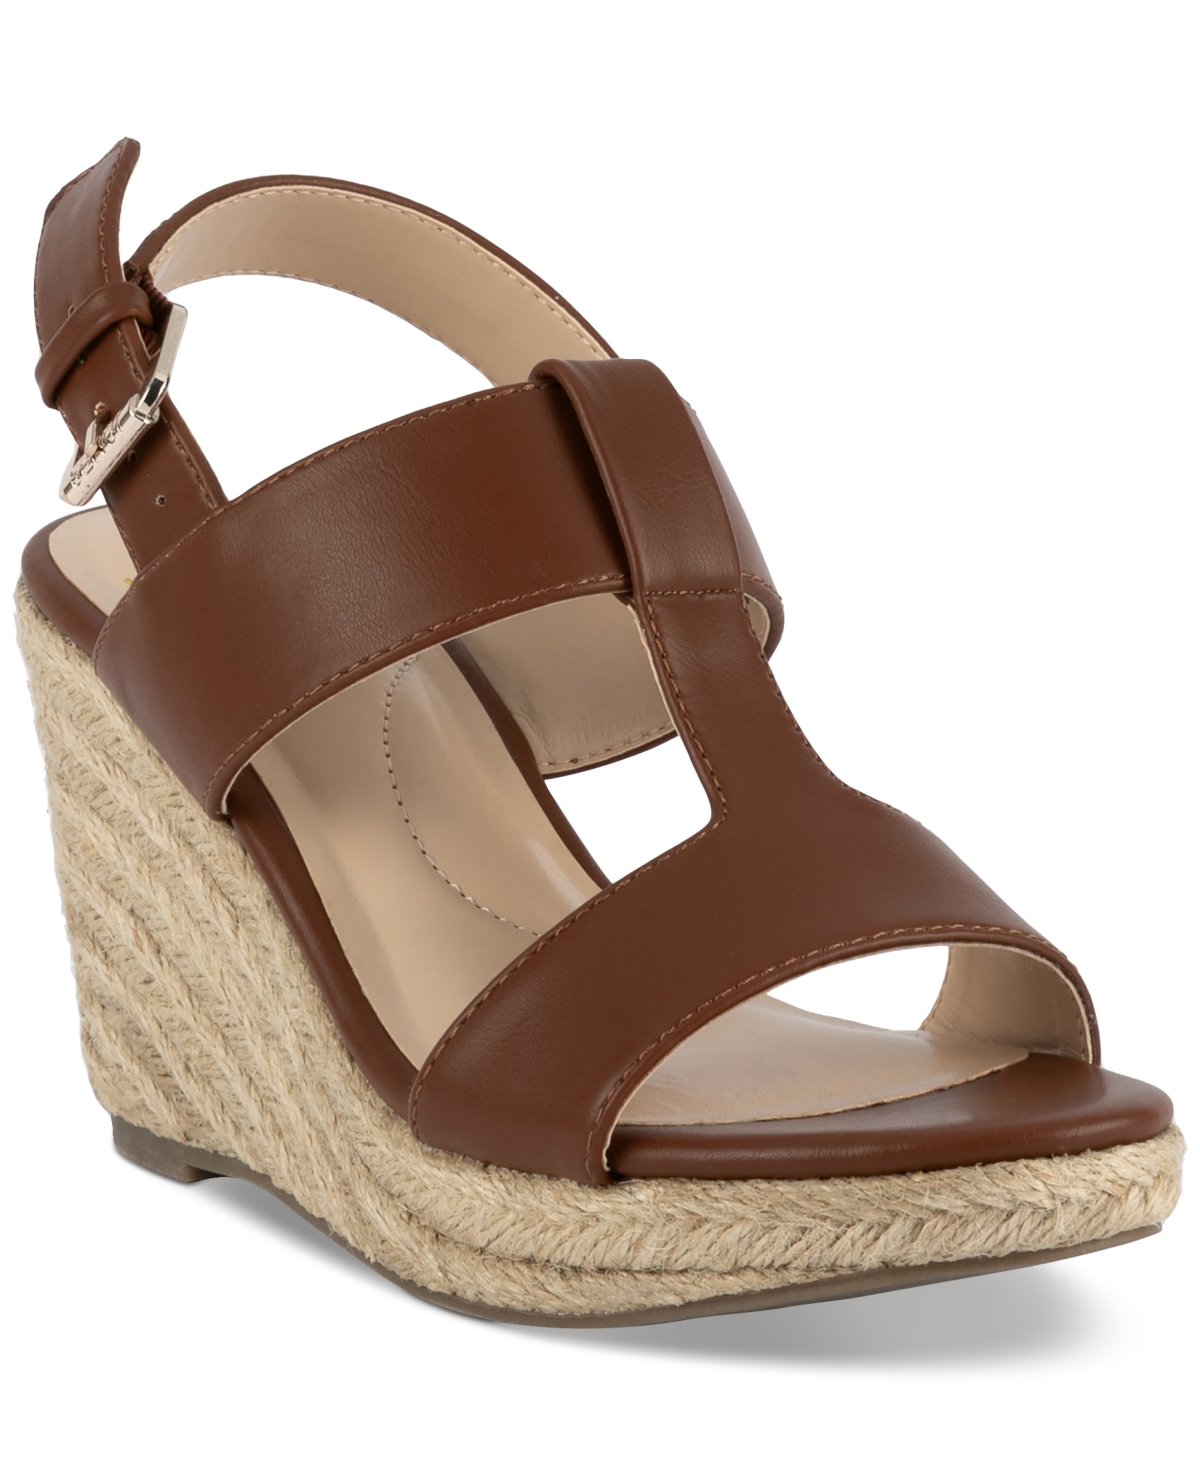 Isortee Strappy Espadrille Wedge Sandals, Created for Macy's - Cognac